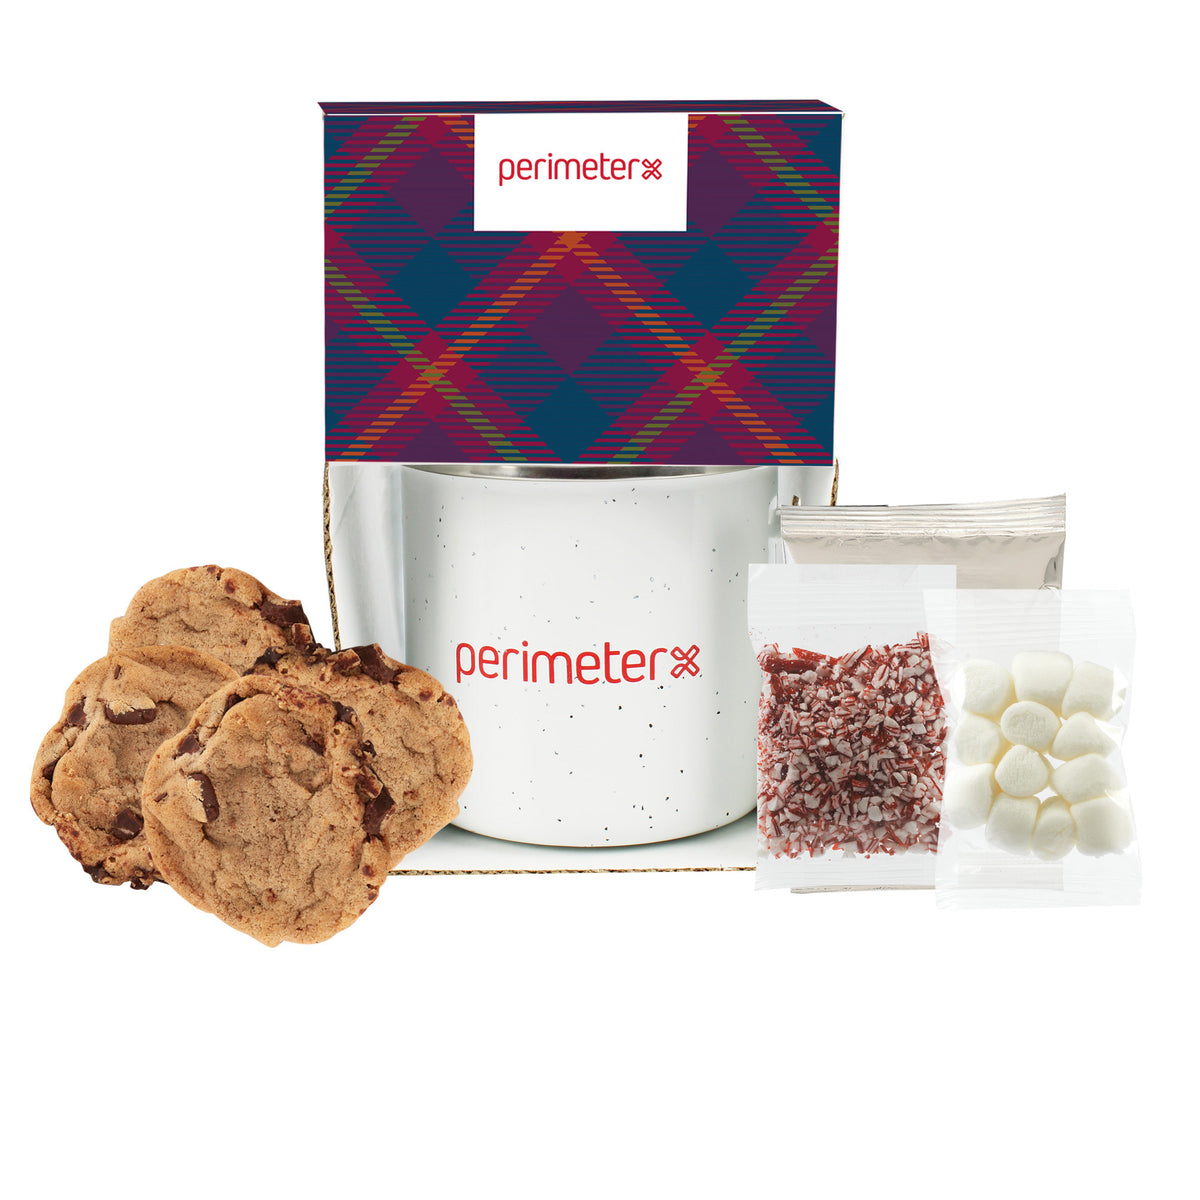 Speckled Camping Mug - 16 oz., Gourmet Chocolate Chip Cookies, Hot Chocolate Holiday Set